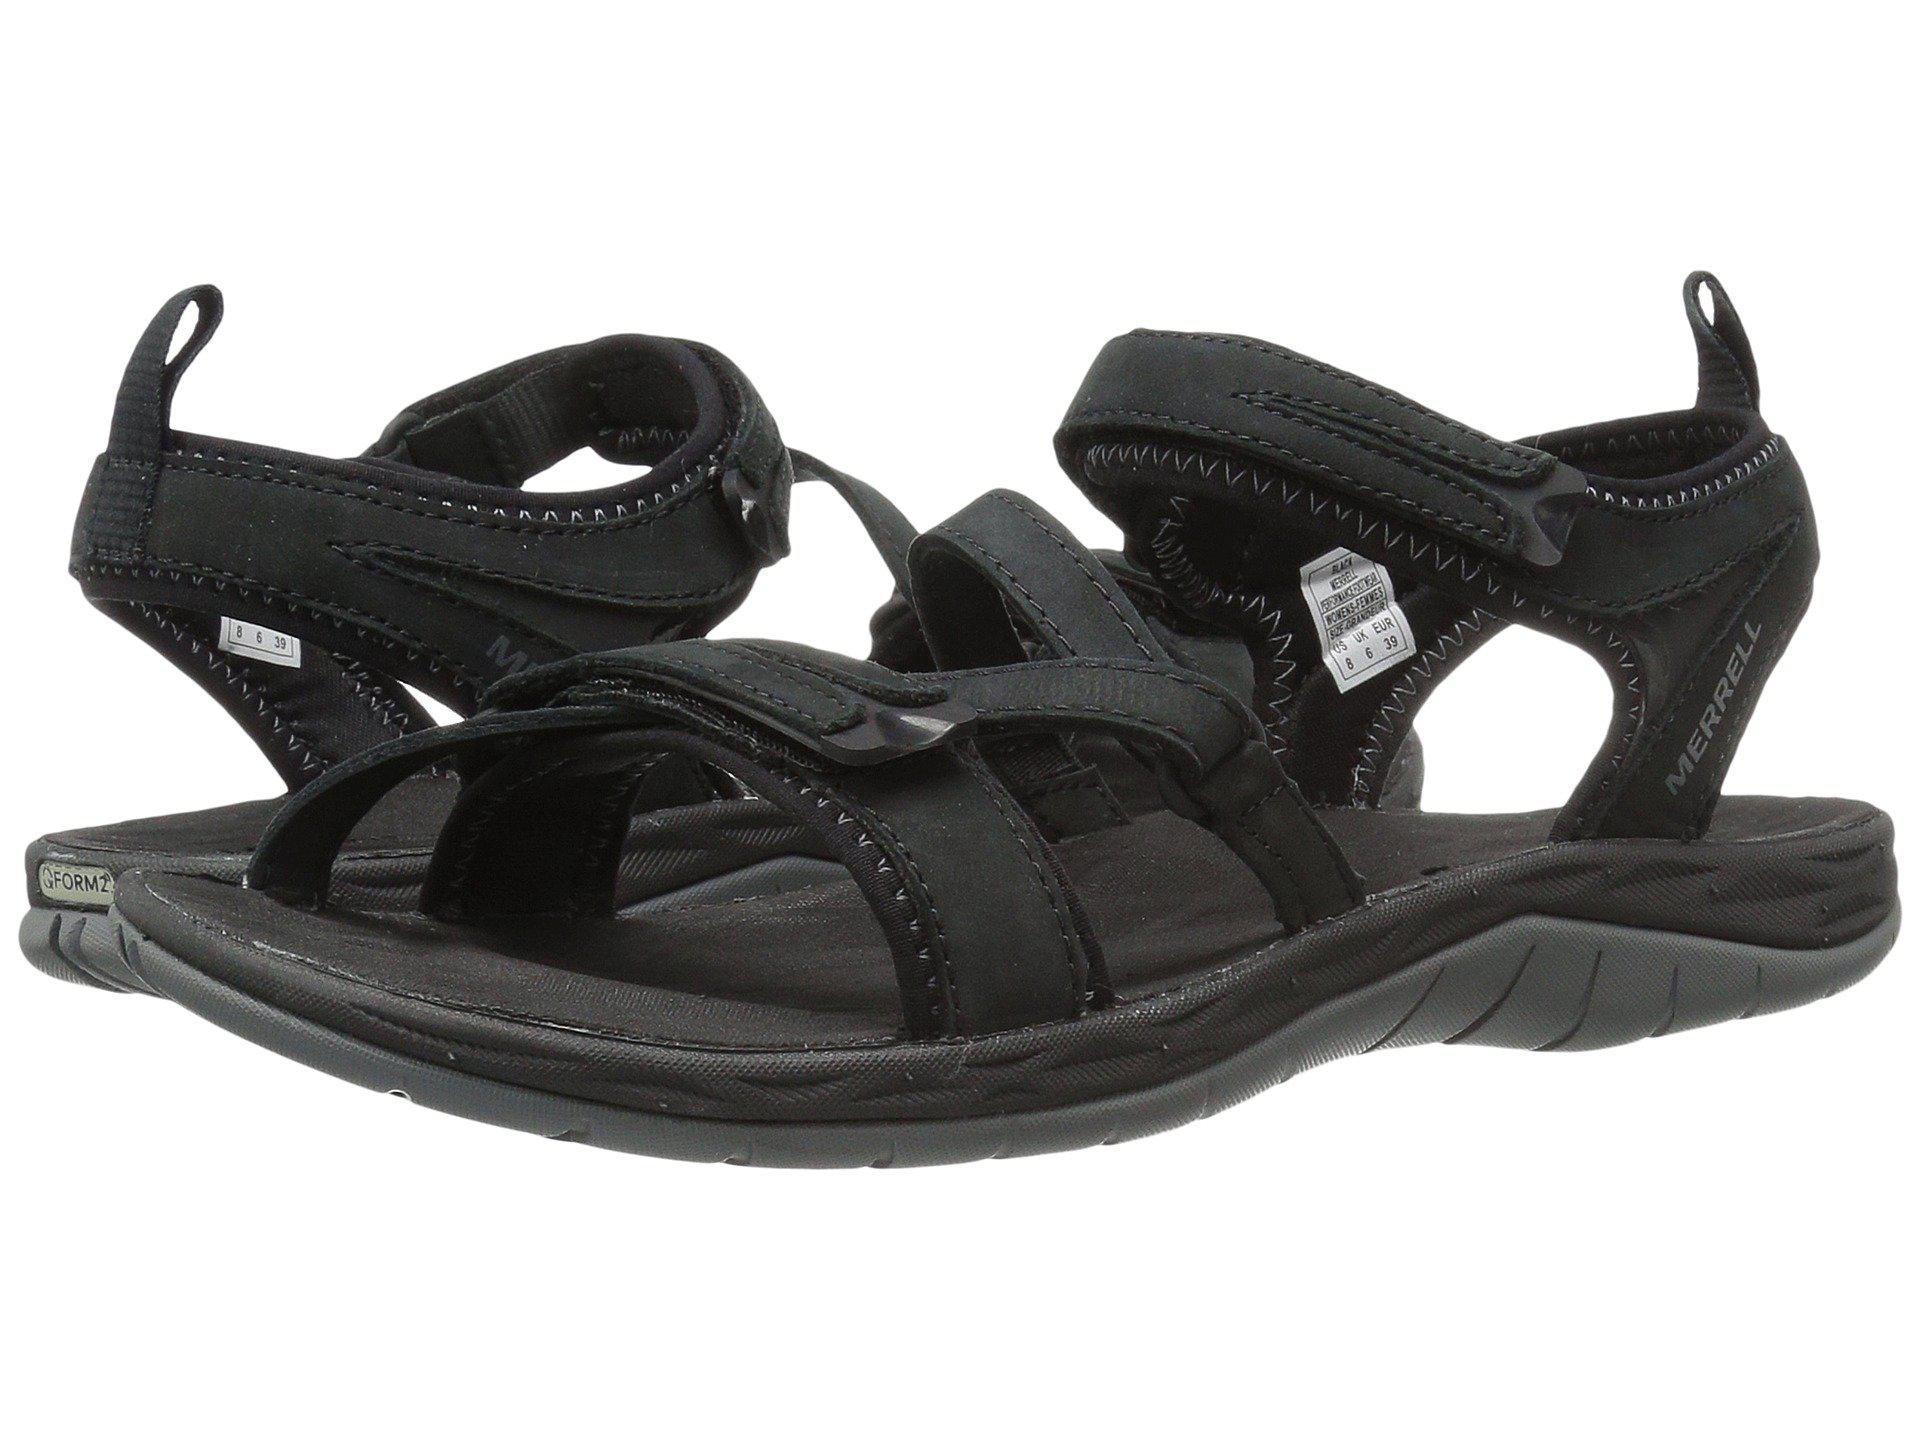 Merrell Synthetic Siren Strap Q2 Waterproof Leather Sandals in Lyst